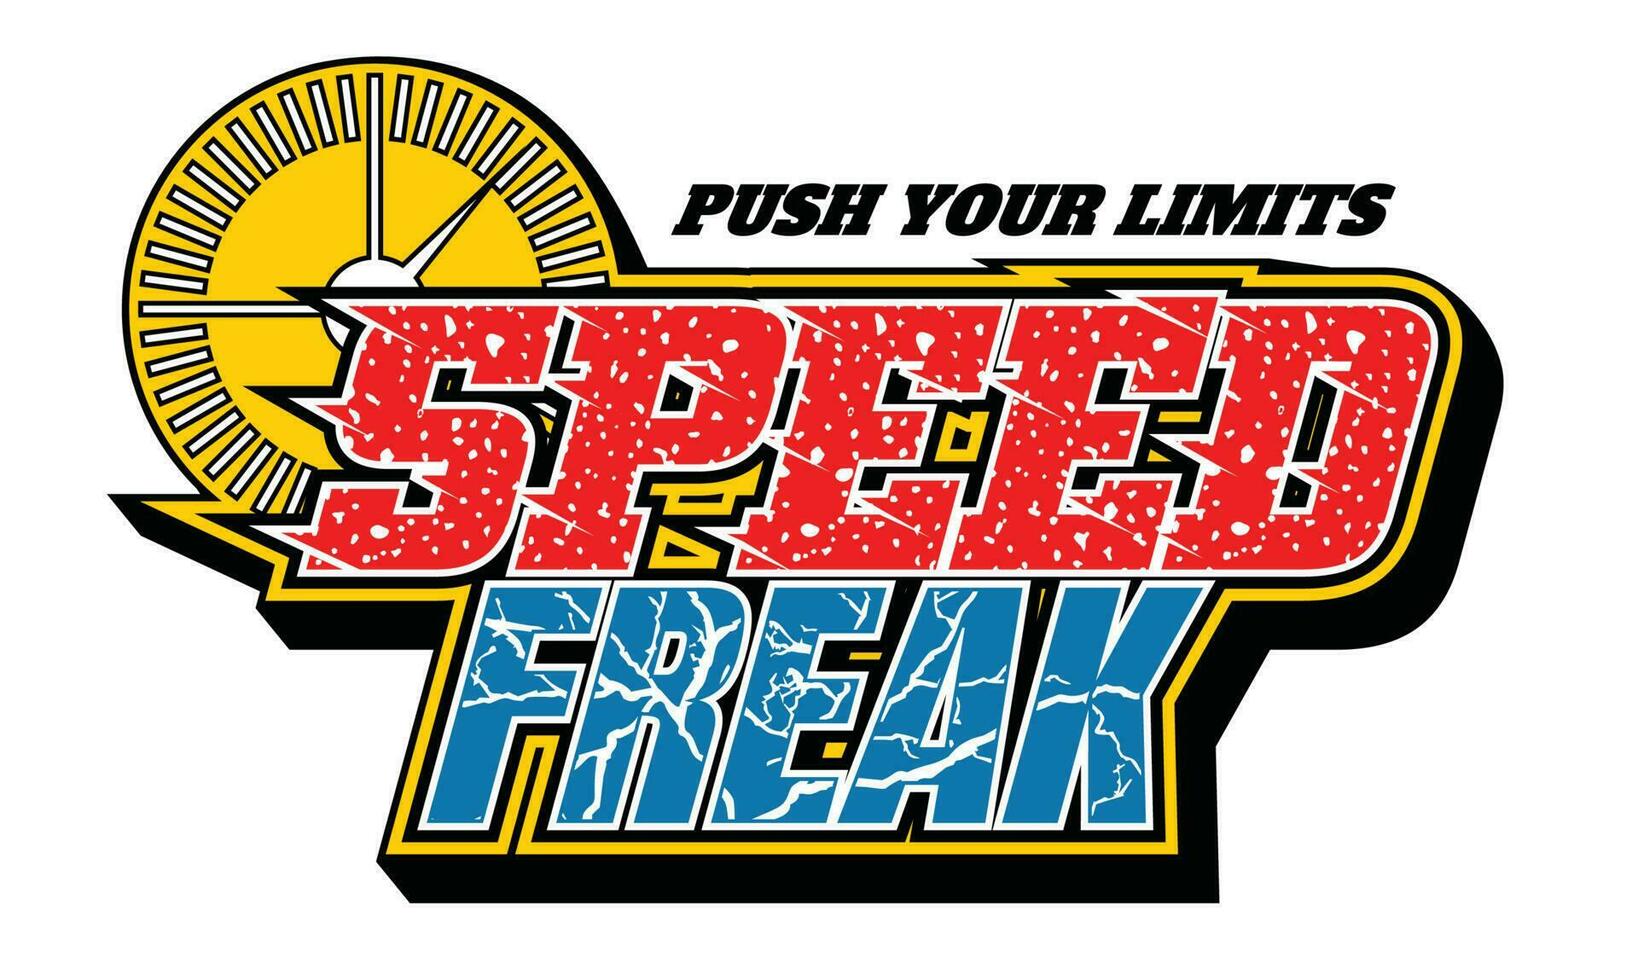 Speed freak element of modern men fashion in lettering typography graphic design.Vector illustration.tshirt,clothing,apparel and other uses vector